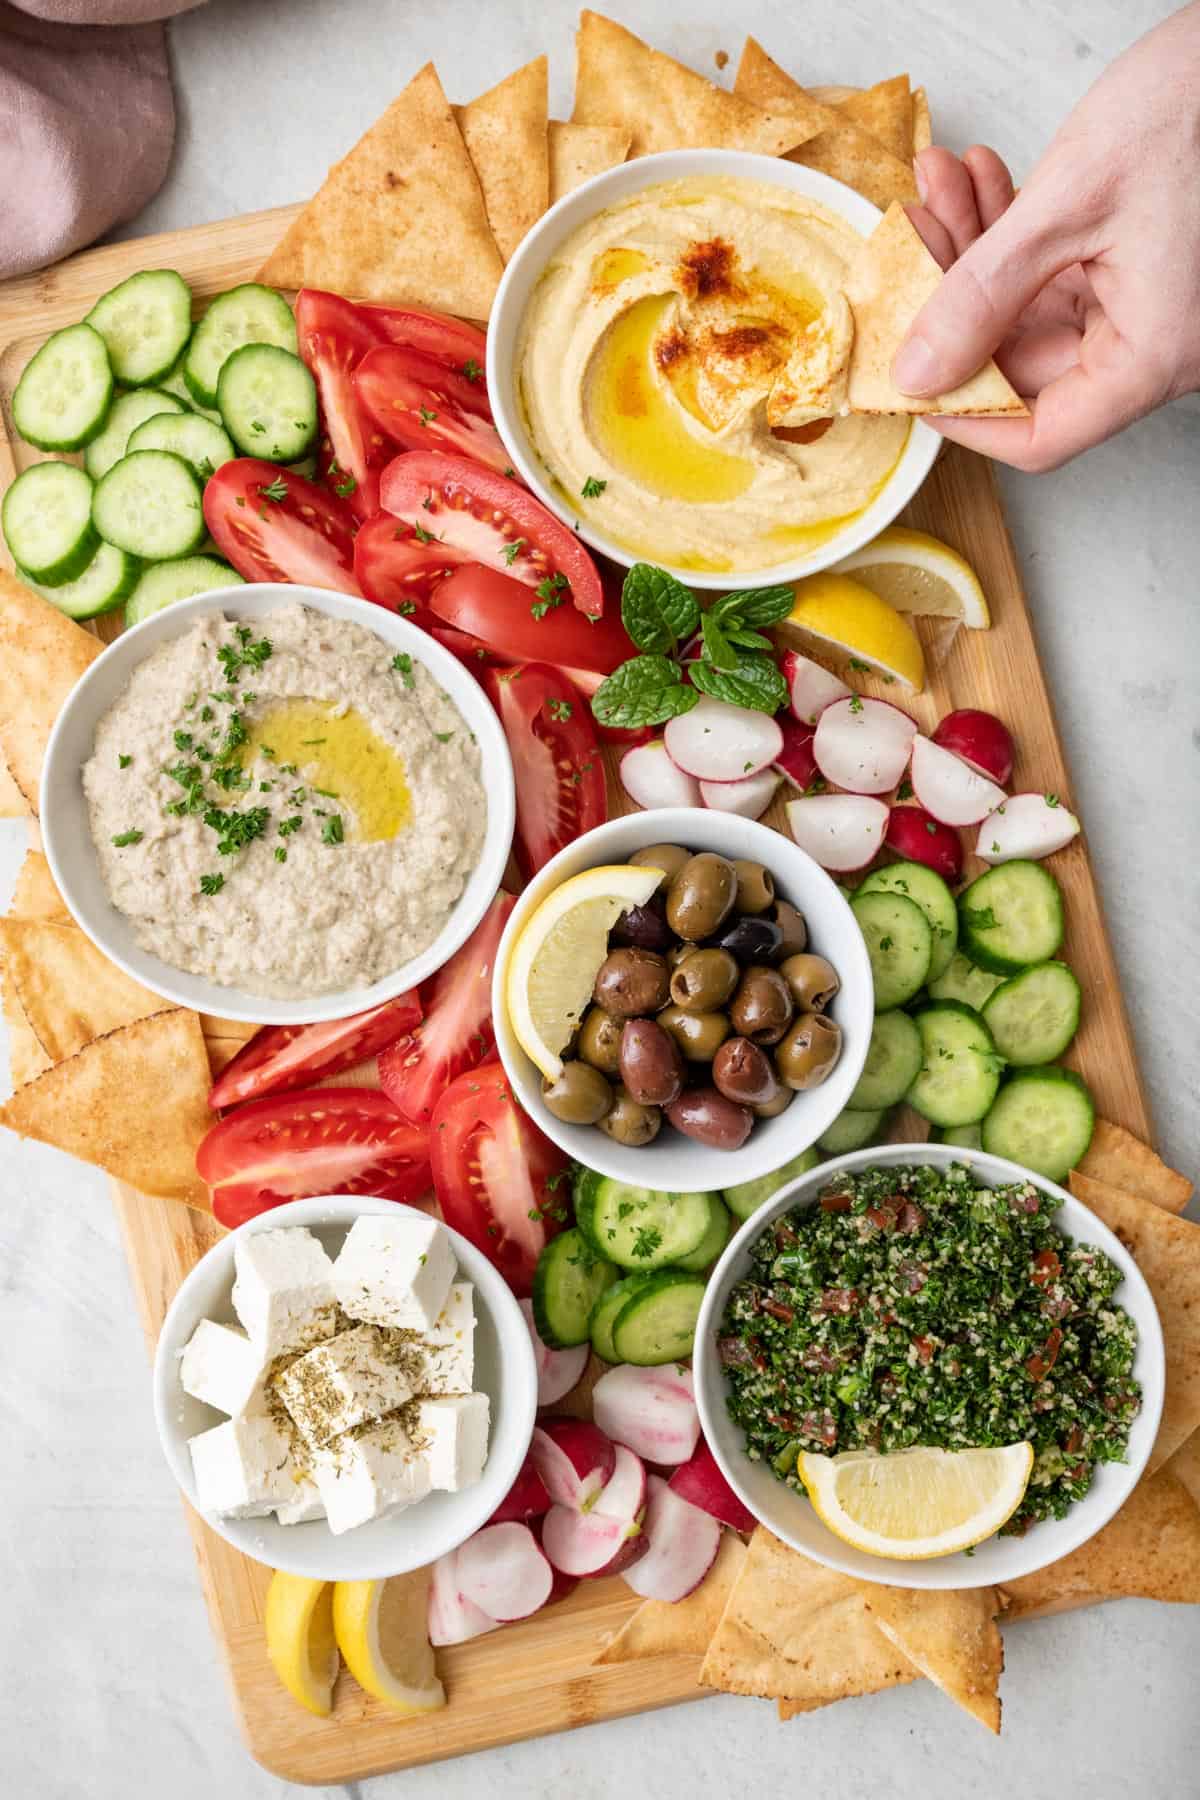 Hand dipping a pita chip into a bowl of hummus from a mezze platter spread with varies dips and vegetables.